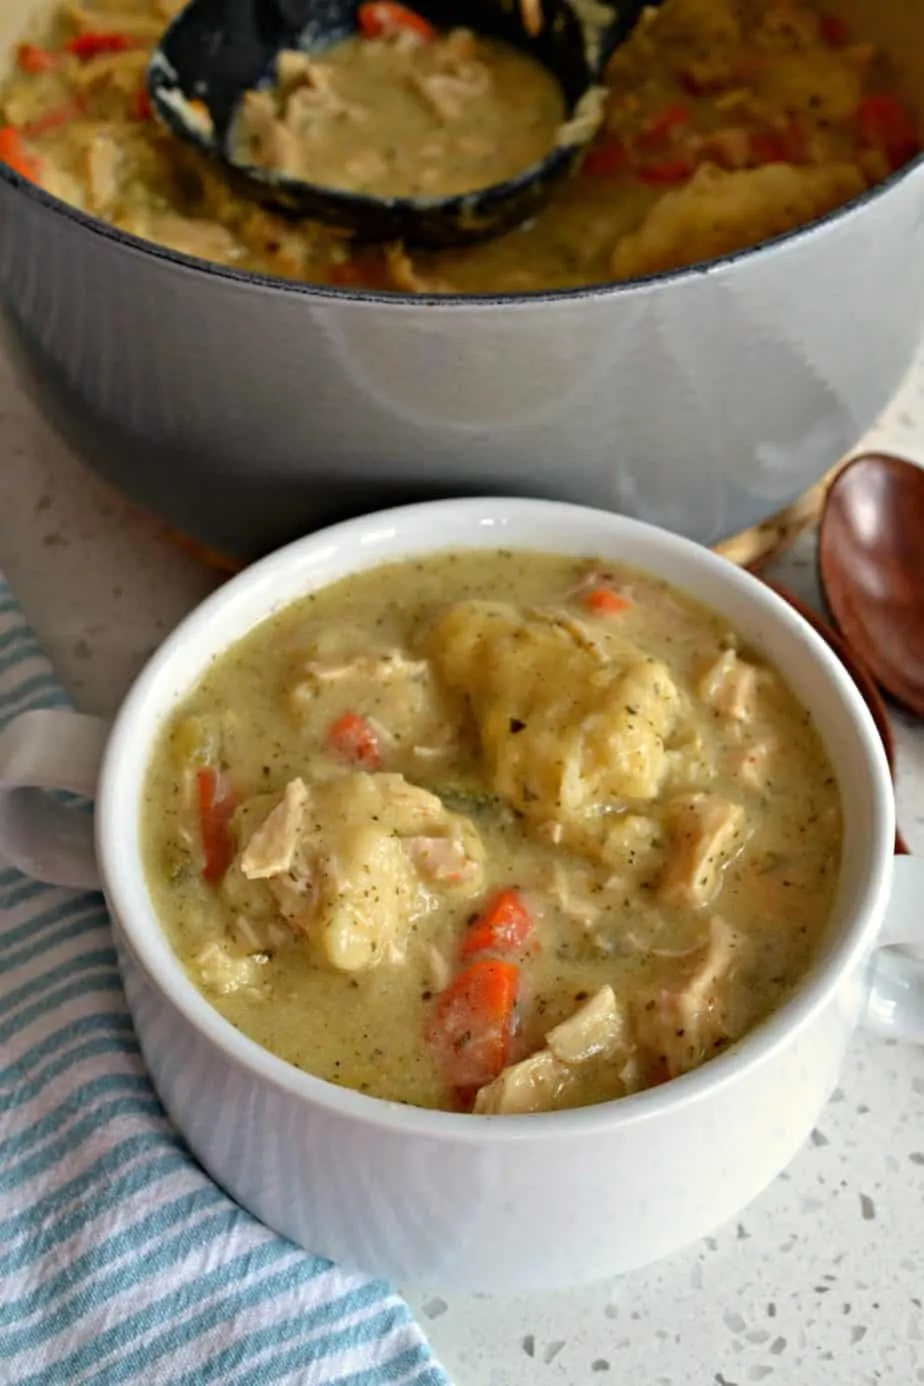 This Chicken and Dumpling Soup recipe will really satisfy your longing for a good home cooked meal.